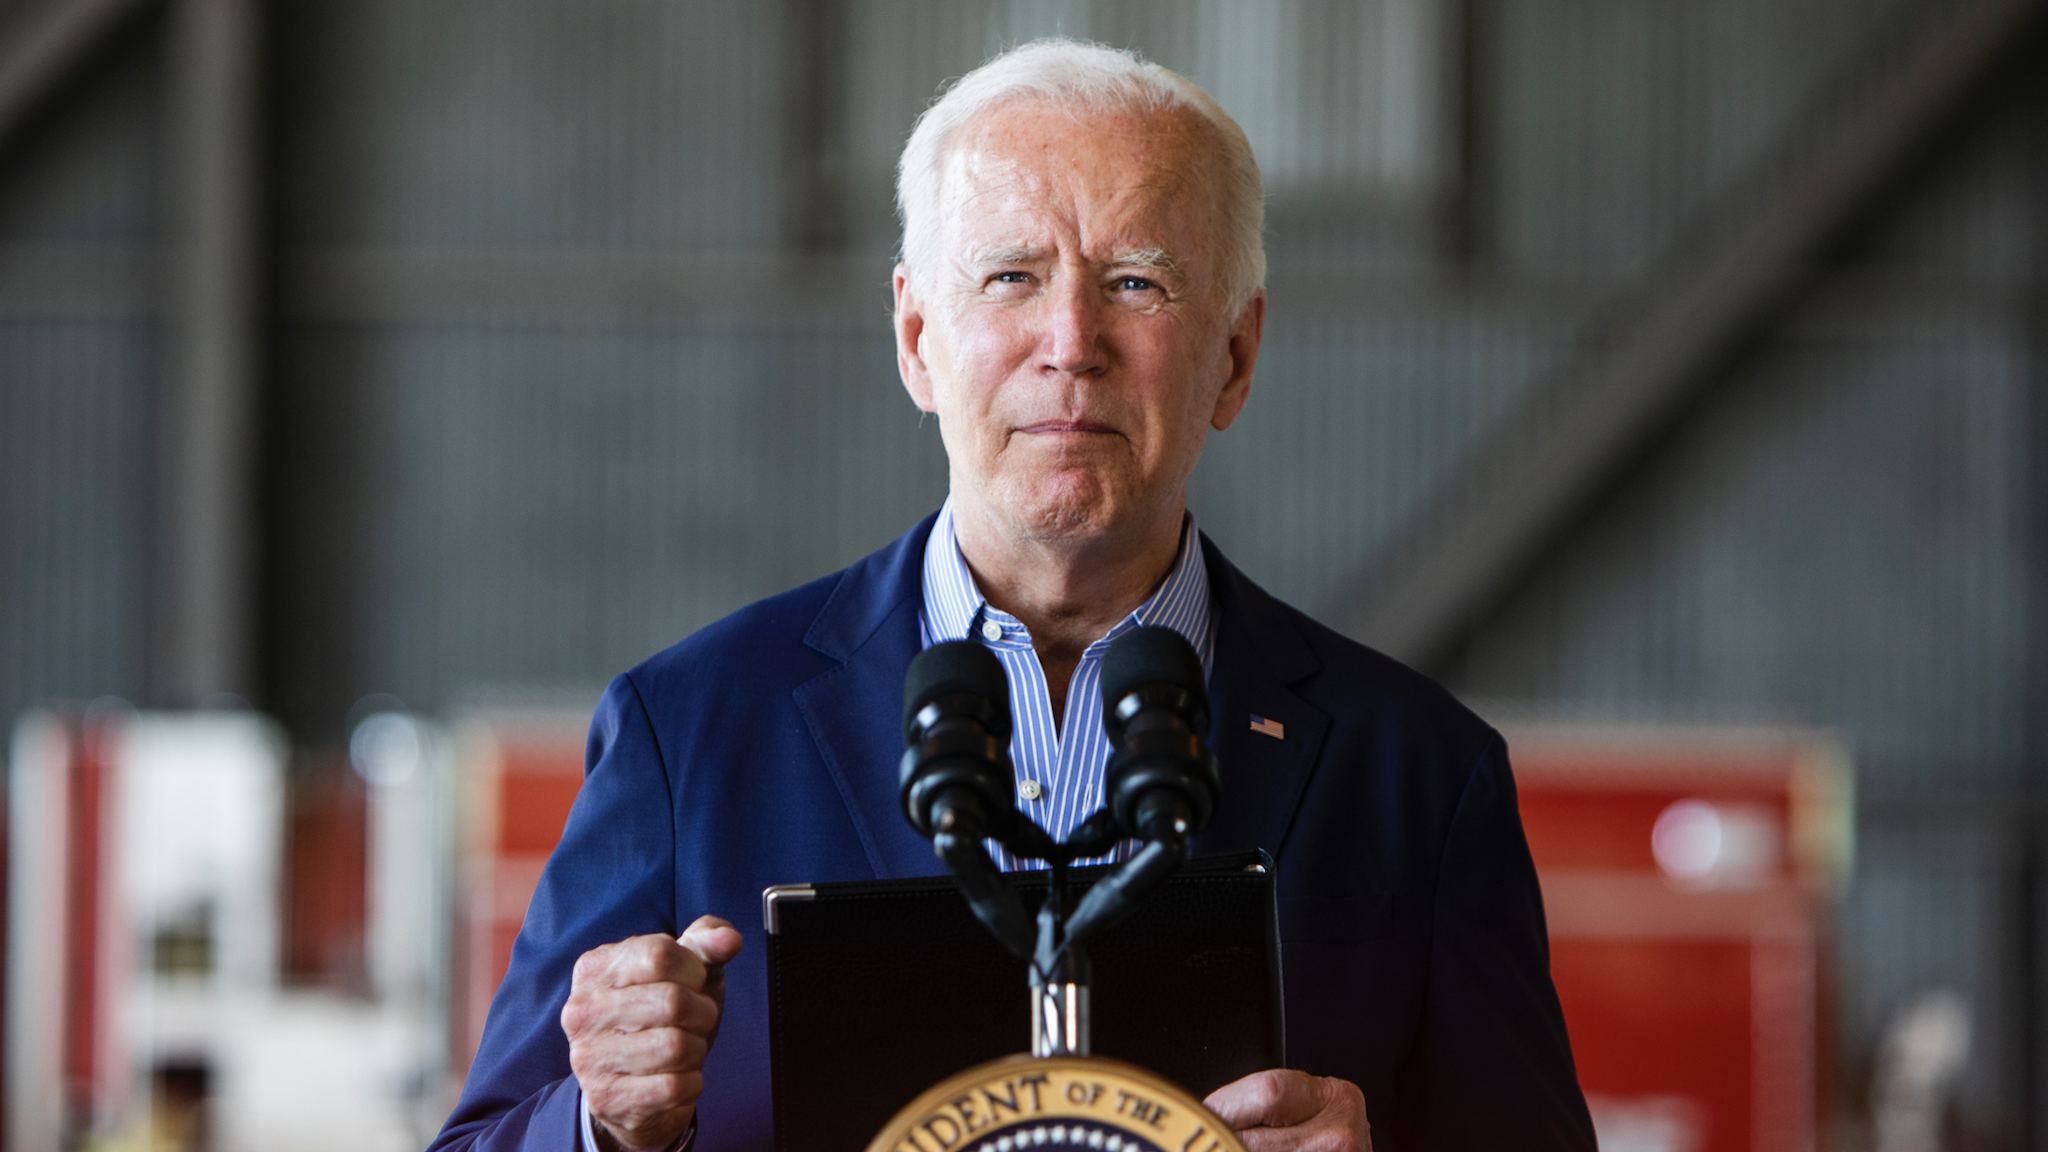 SACRAMENTO, CA - SEPTEMBER 13: President Joe Biden speaks a press conference held at Mather airport in Sacramento, Calif., on Monday, September 13, 2021. The President visited California to survey wildfire damage in response to recent wildfires.